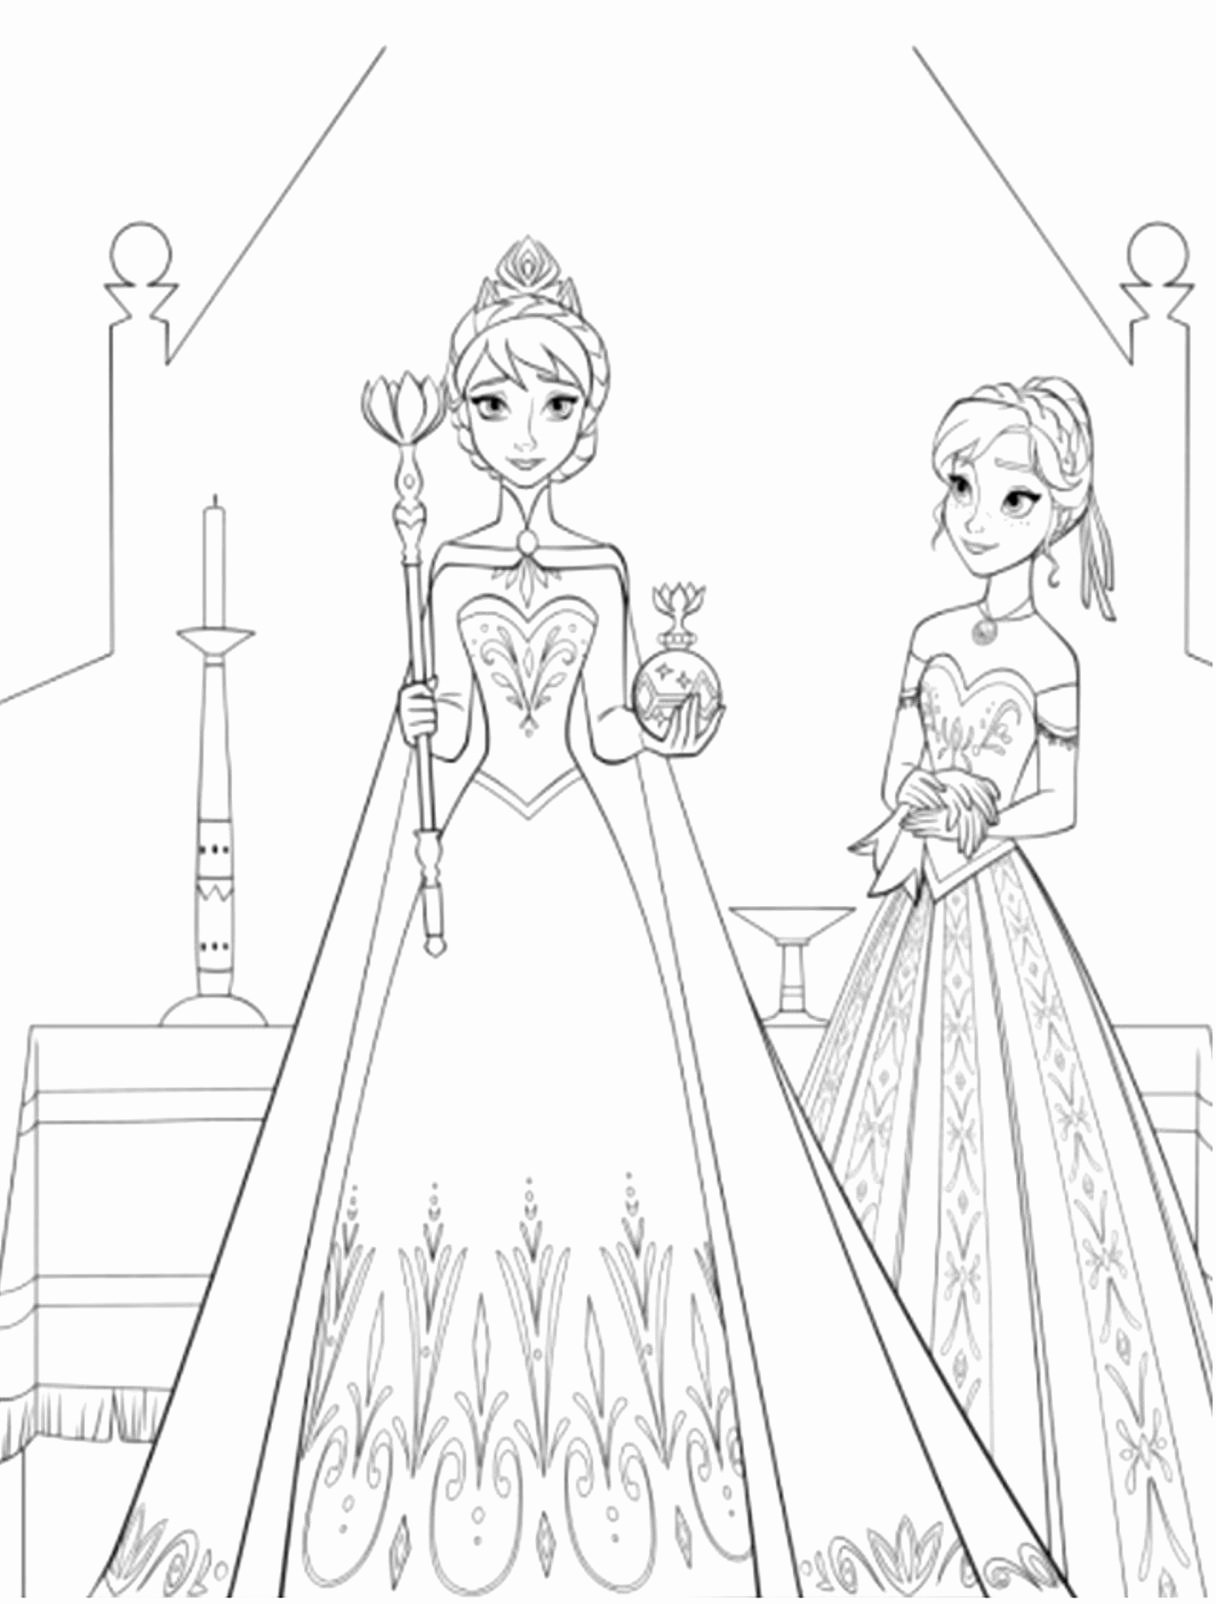 coloring pages of frozen fever songs